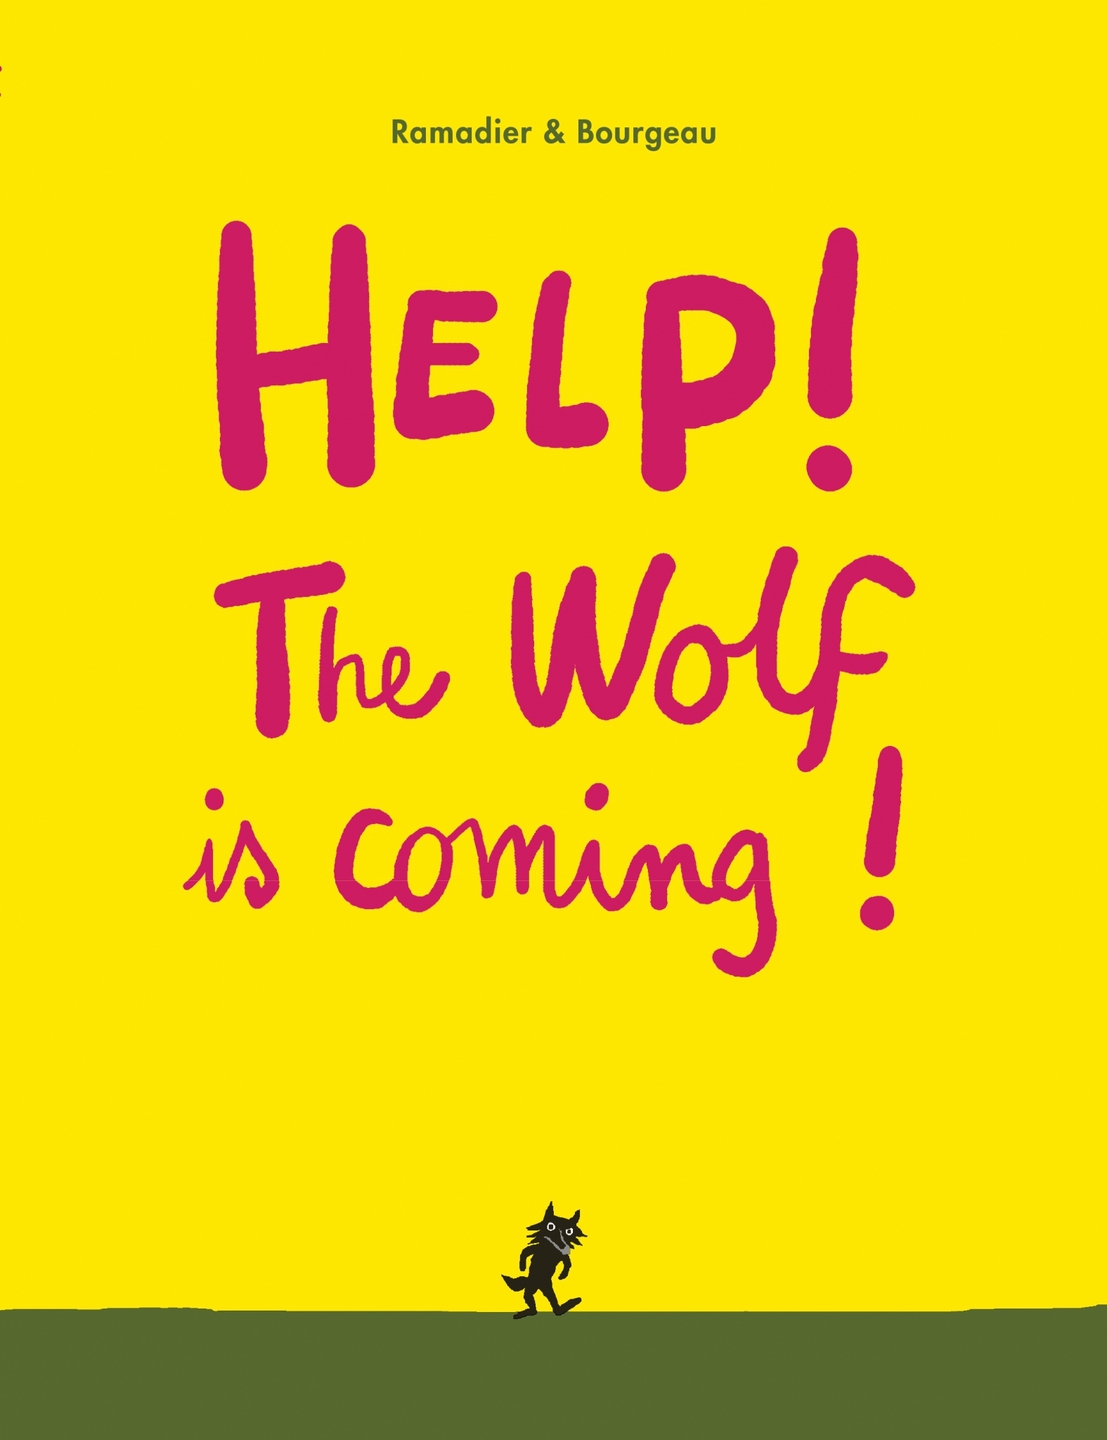 Help! the wolf is coming book, Cedric Ramadier, Vincent Bourgeau, interactive boardbook for toddlers